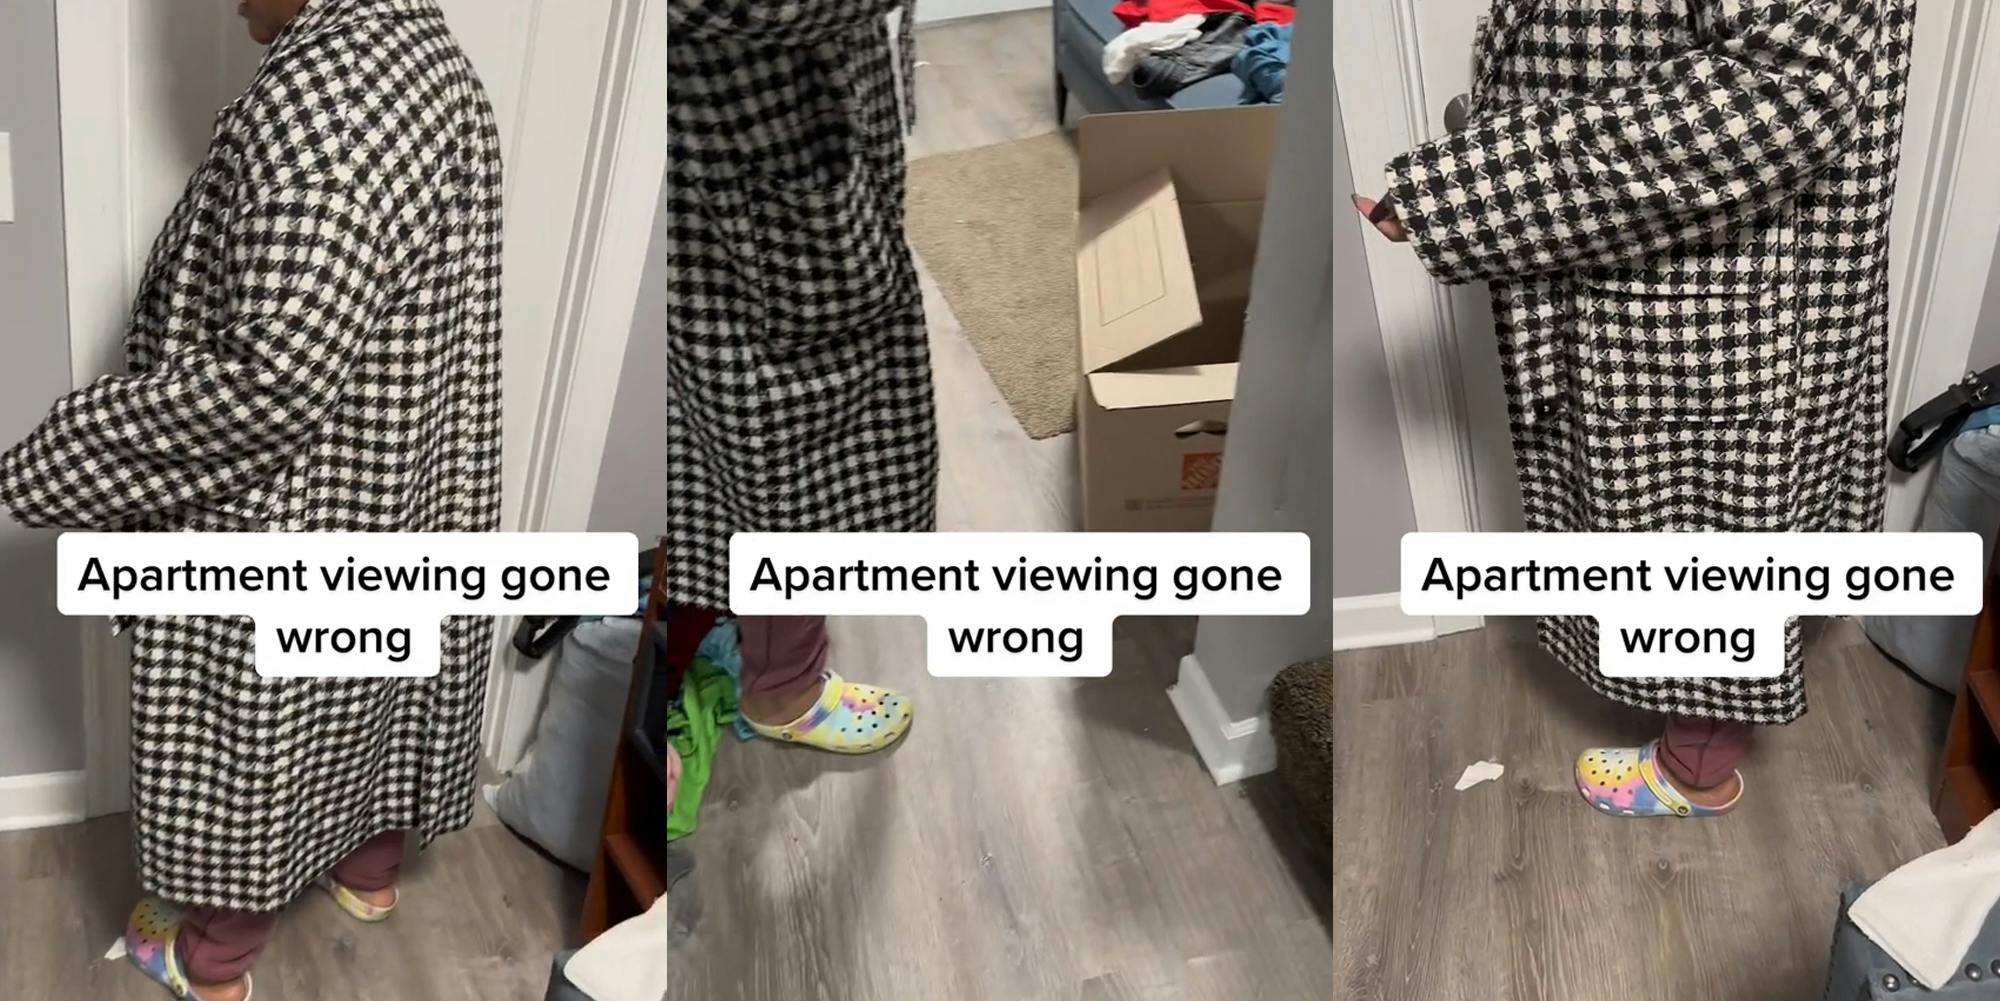 woman in apartment at door with caption "Apartment viewing gone wrong" (l) woman in apartment with caption "Apartment viewing gone wrong" (c) woman in apartment at door with caption "Apartment viewing gone wrong" (r)